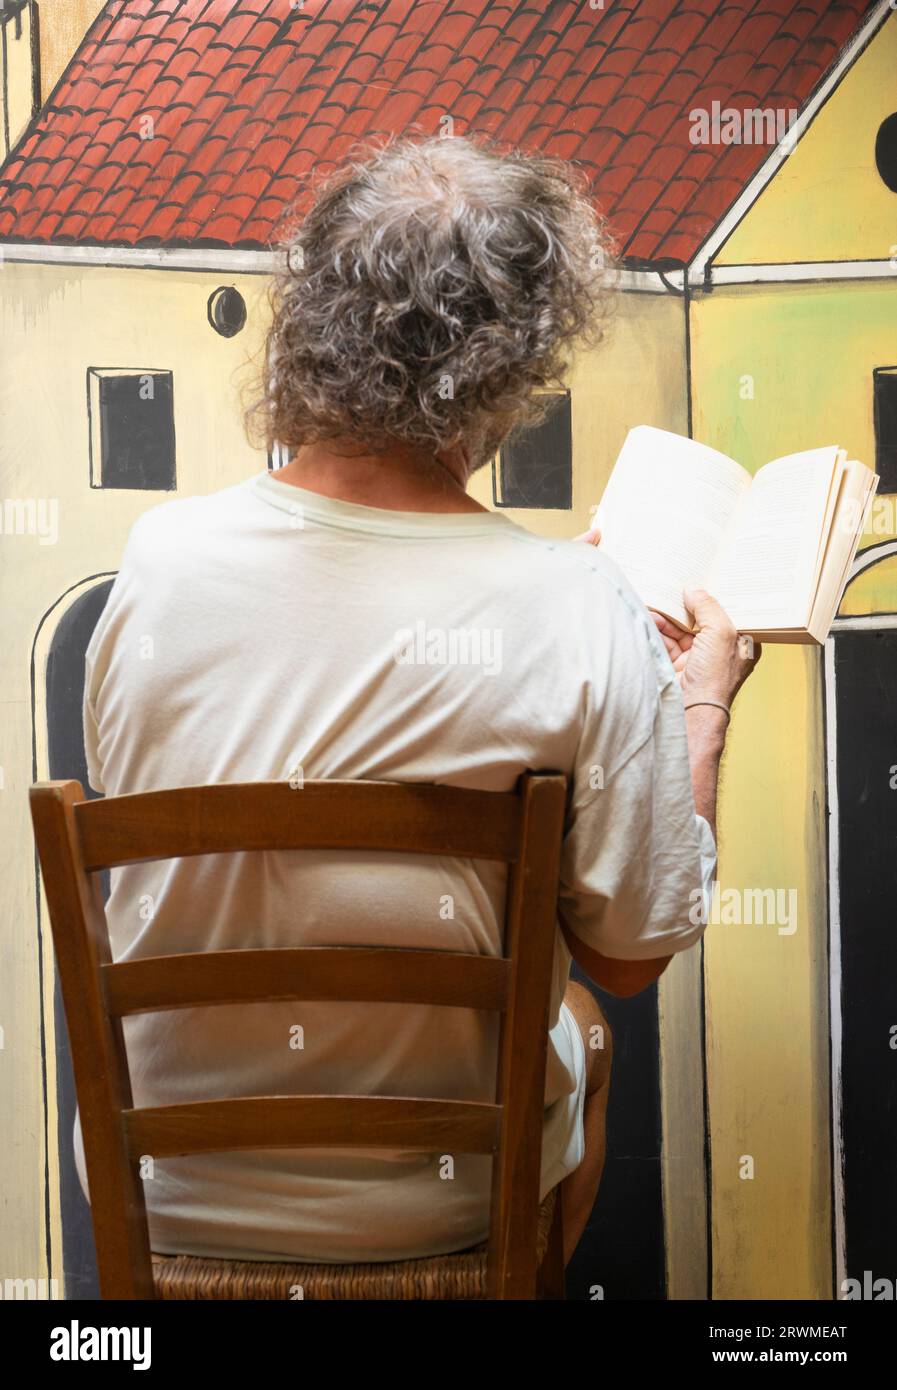 A man from behind sitting in a wooden chair while reading a script in front of a cardboard theater scenery. Stock Photo